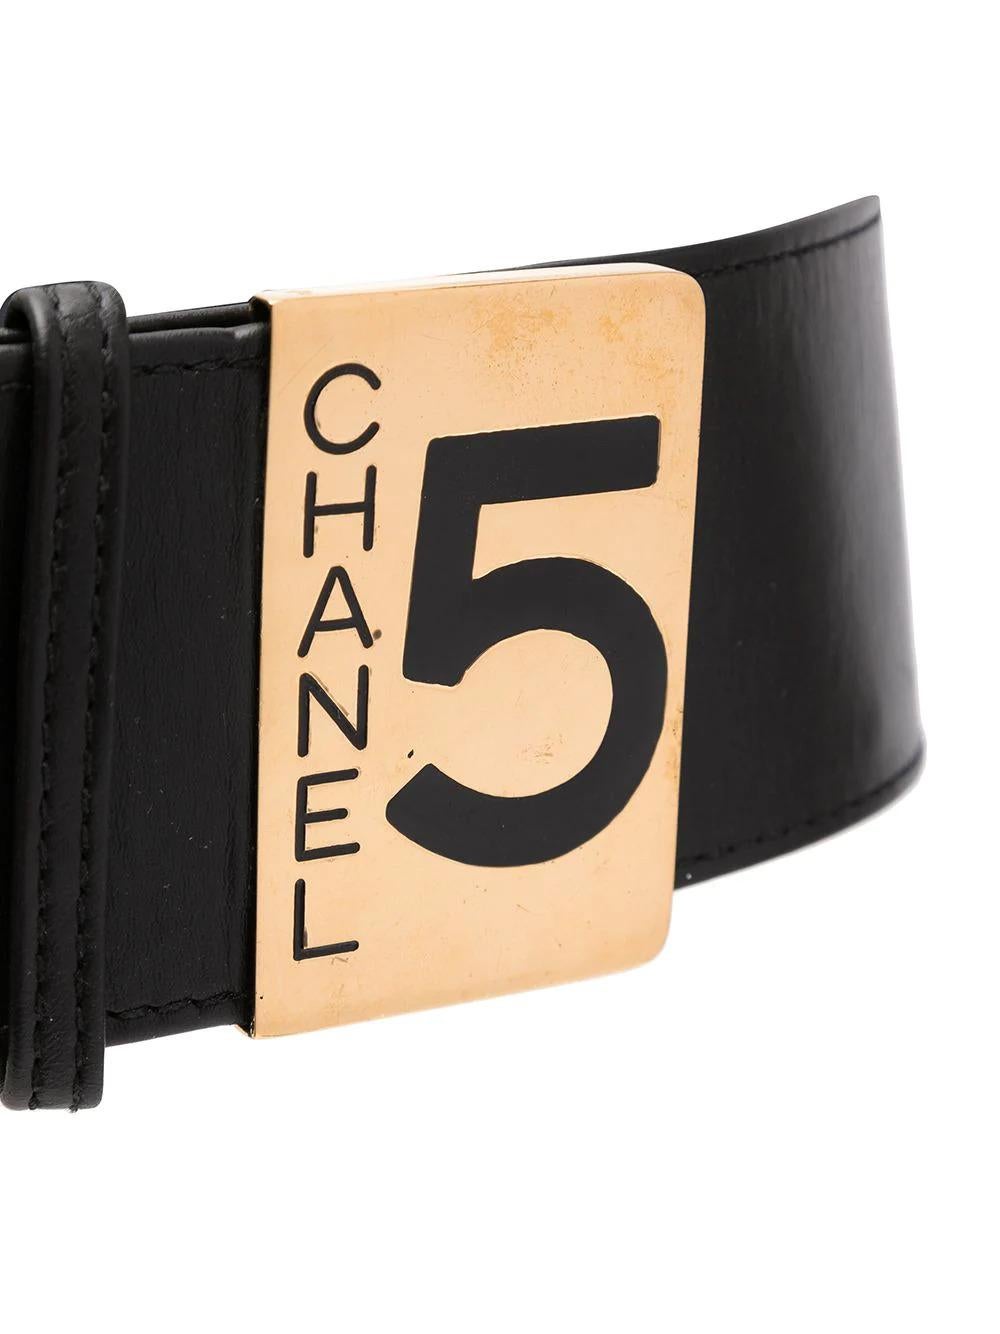 Take your accessories repertoire to whimsical heights with this vintage Chanel belt. It was designed in 1987, four years after Karl Lagerfeld had been inducted to creative director of the house. Imbued with his playfully feminine aesthetic, the belt